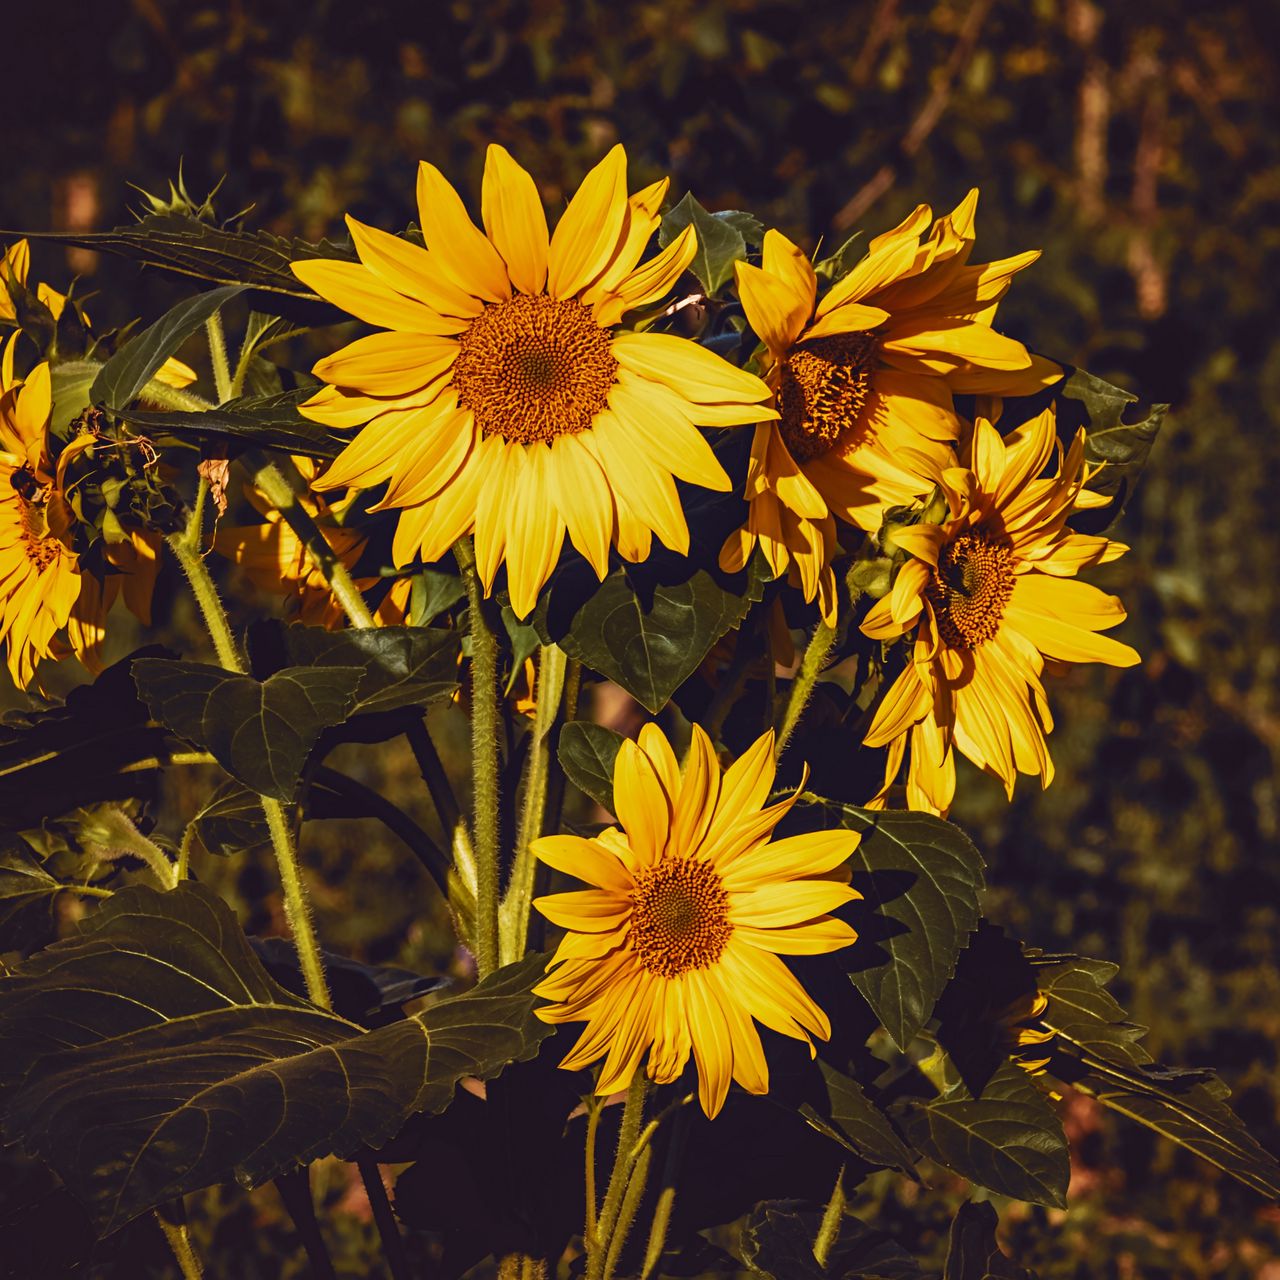 A bunch of yellow sunflowers in the sun - Sunflower